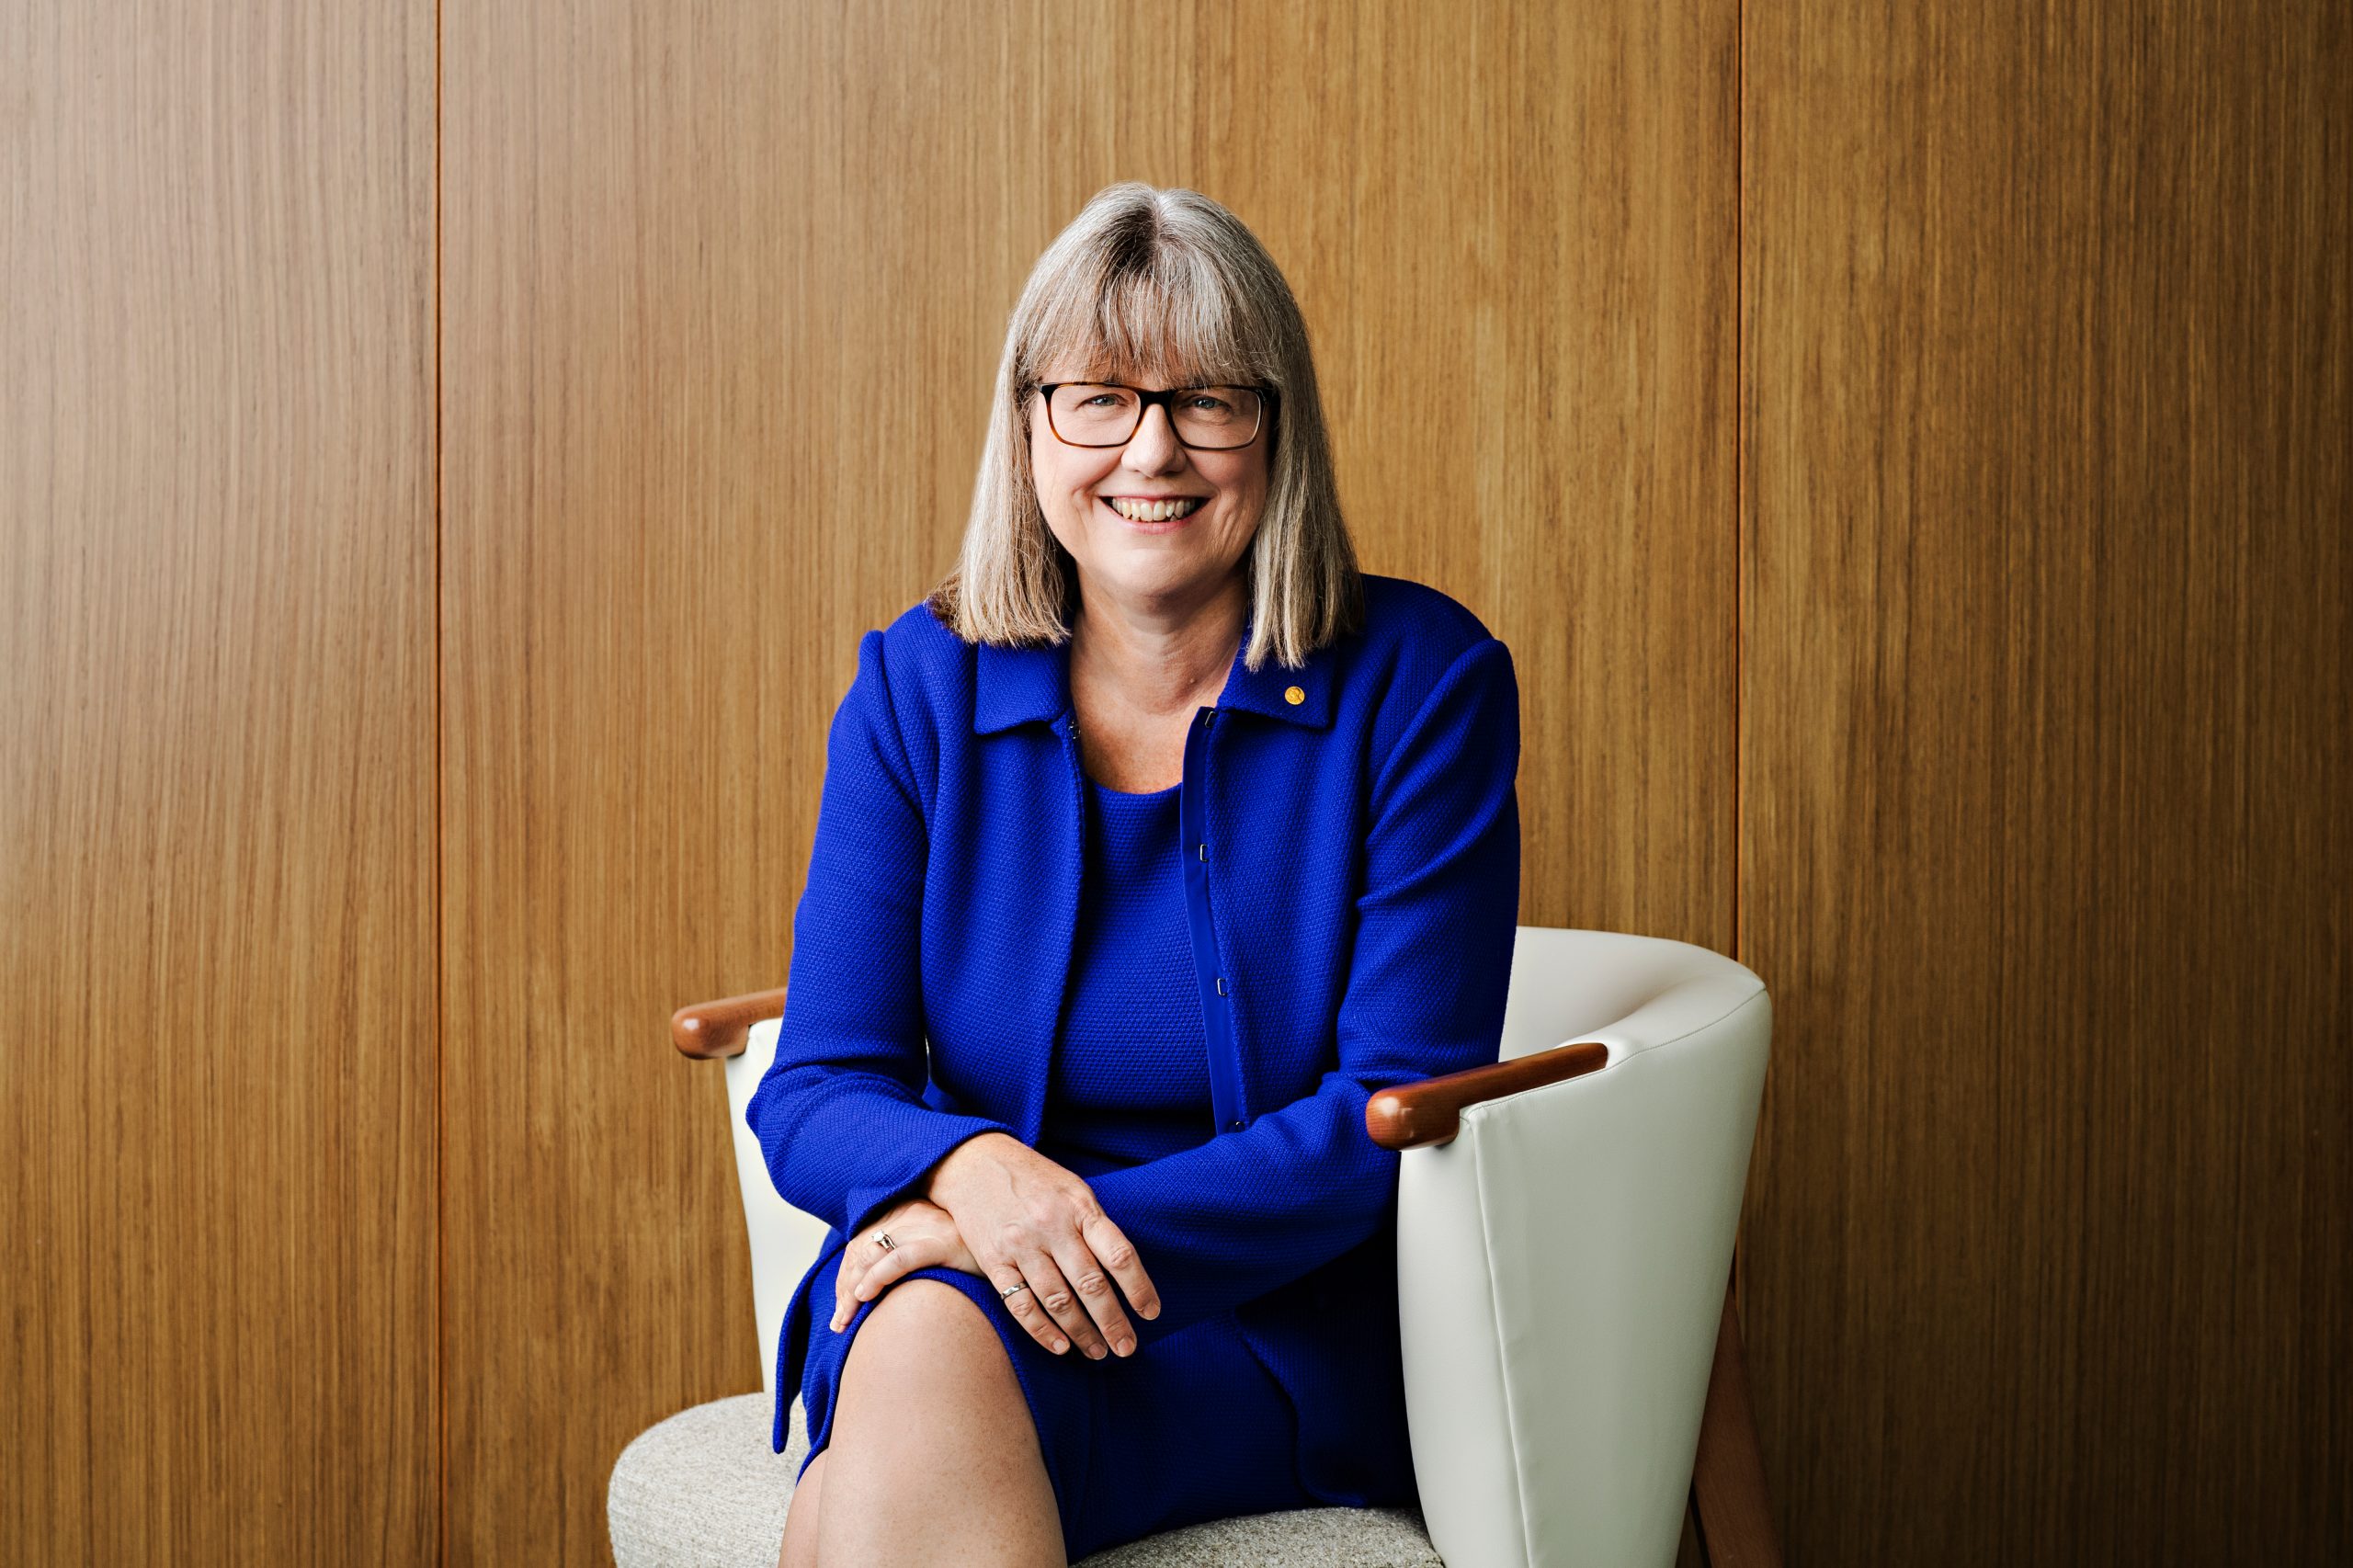 Interview: Donna Strickland, 2018 Nobel Prize in physics